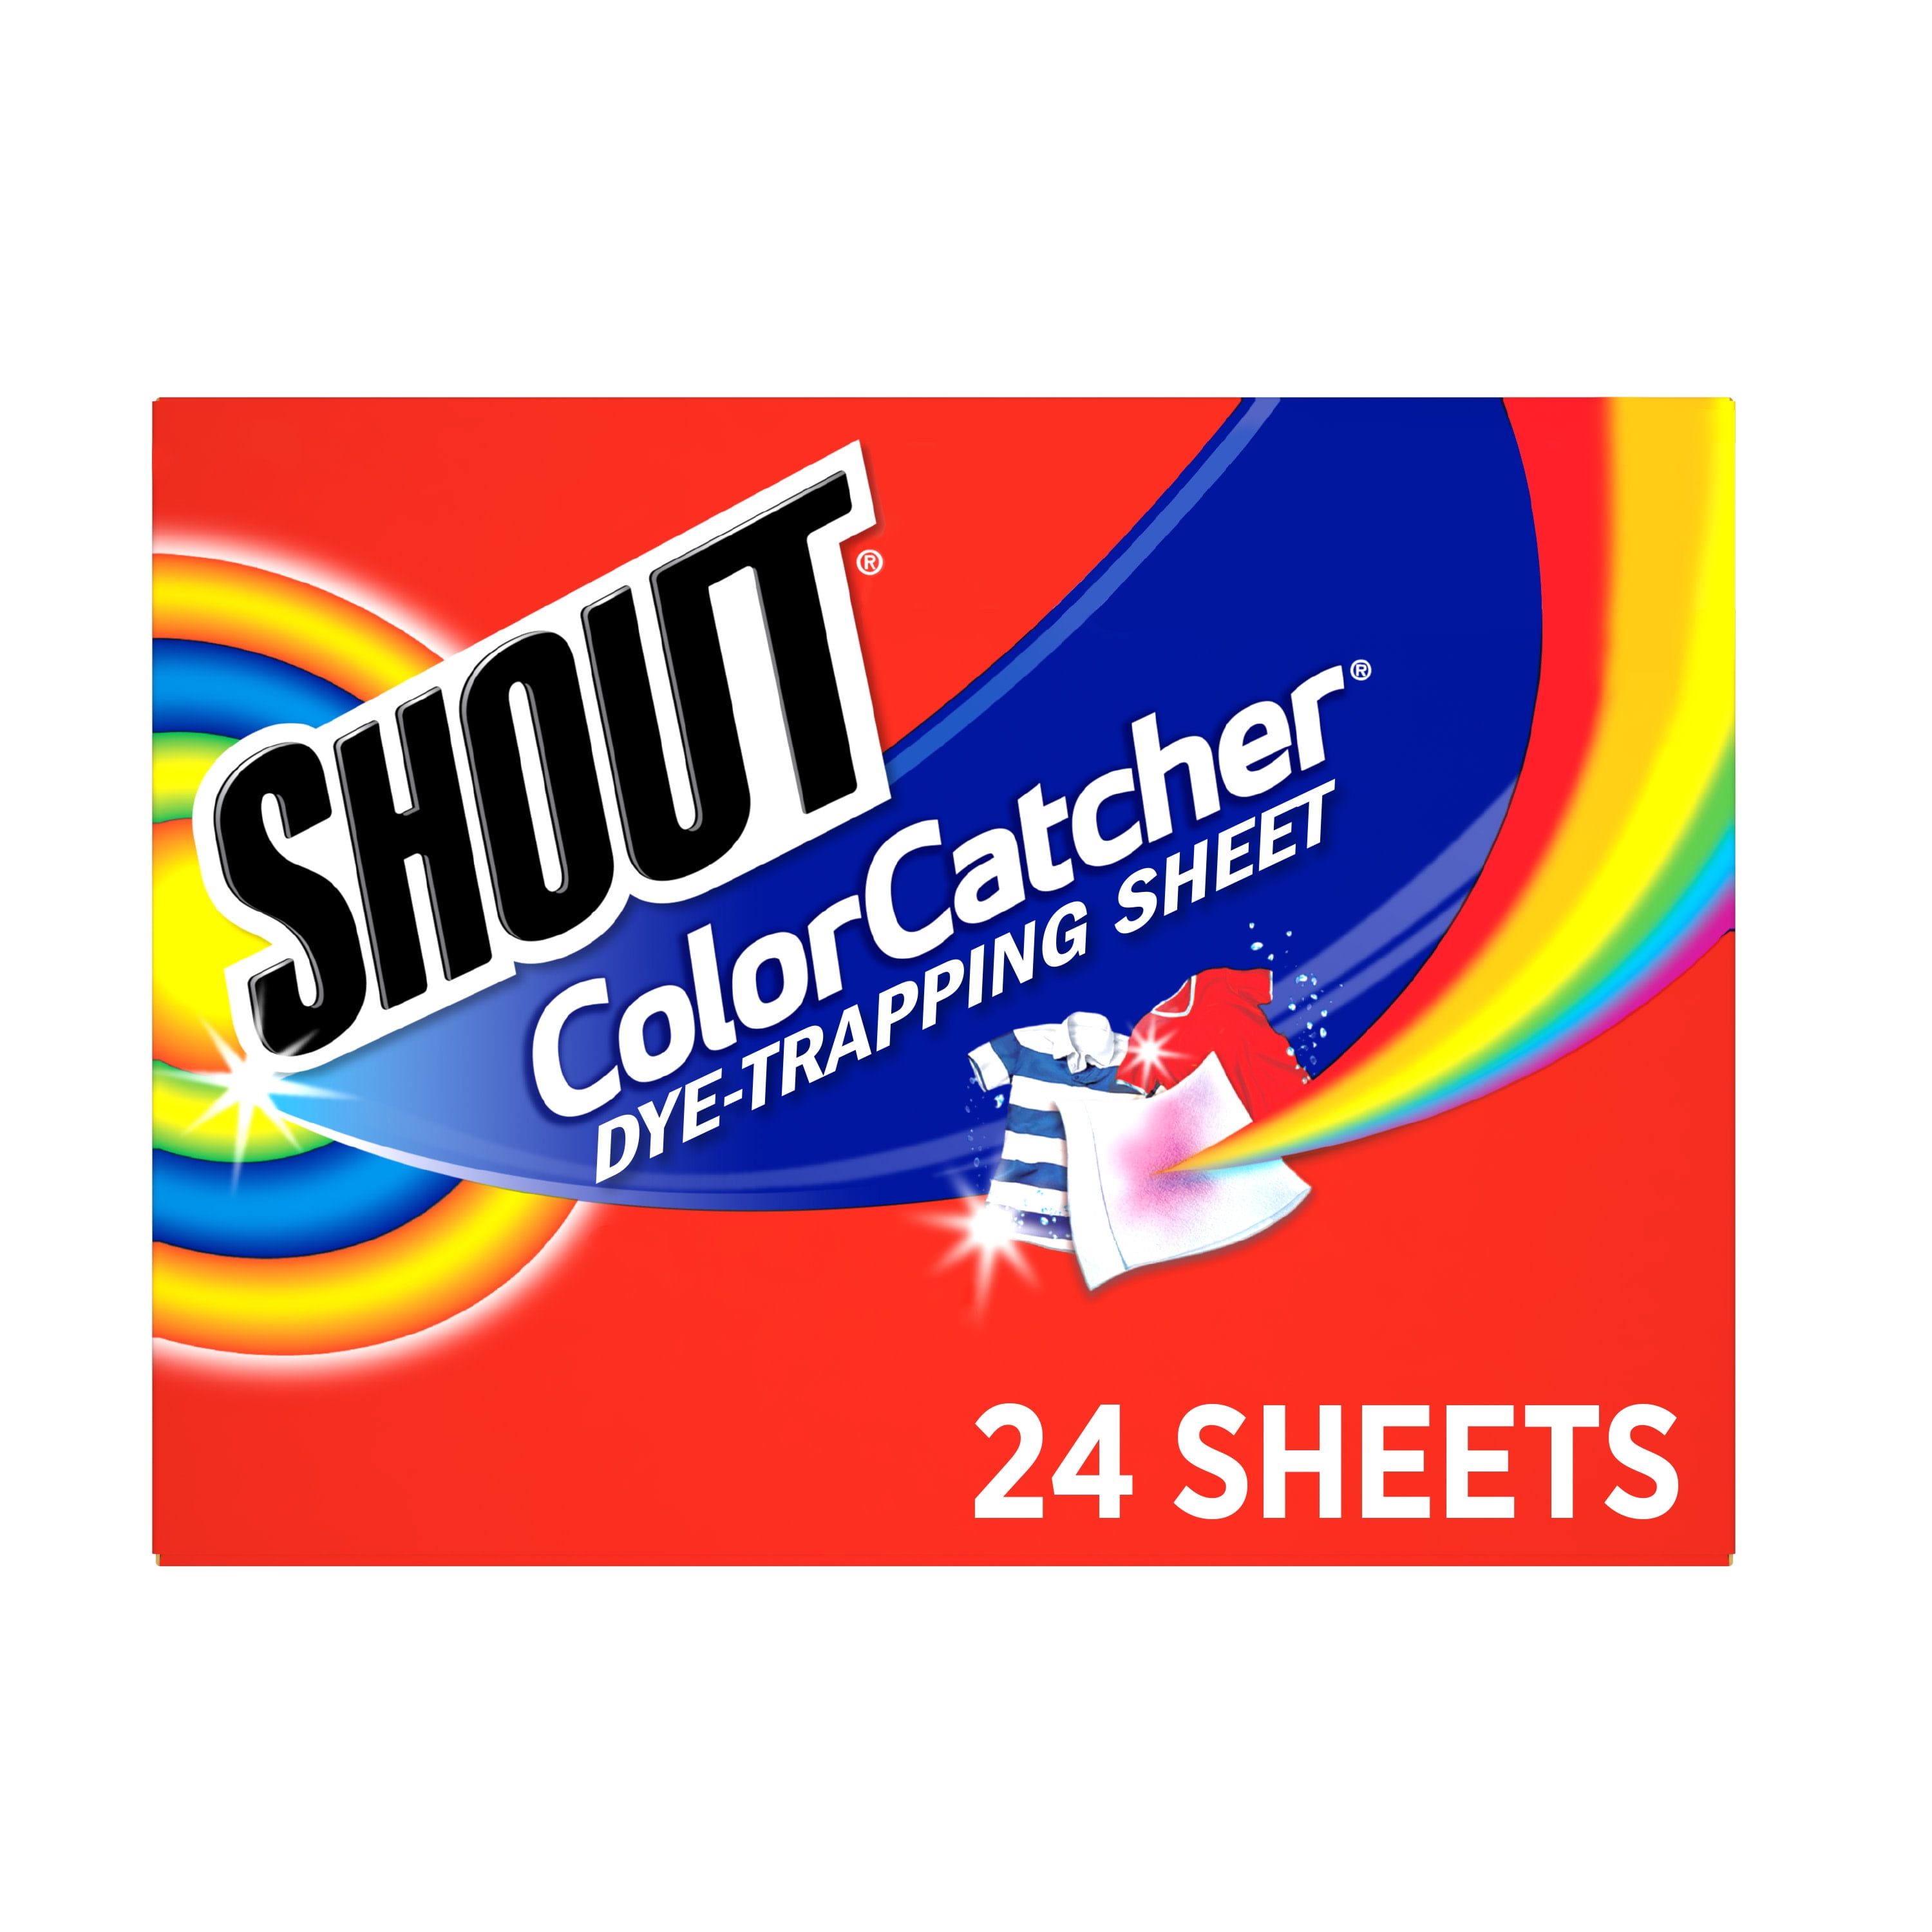 Color Catcher Sheets for Laundry – Molly's Suds